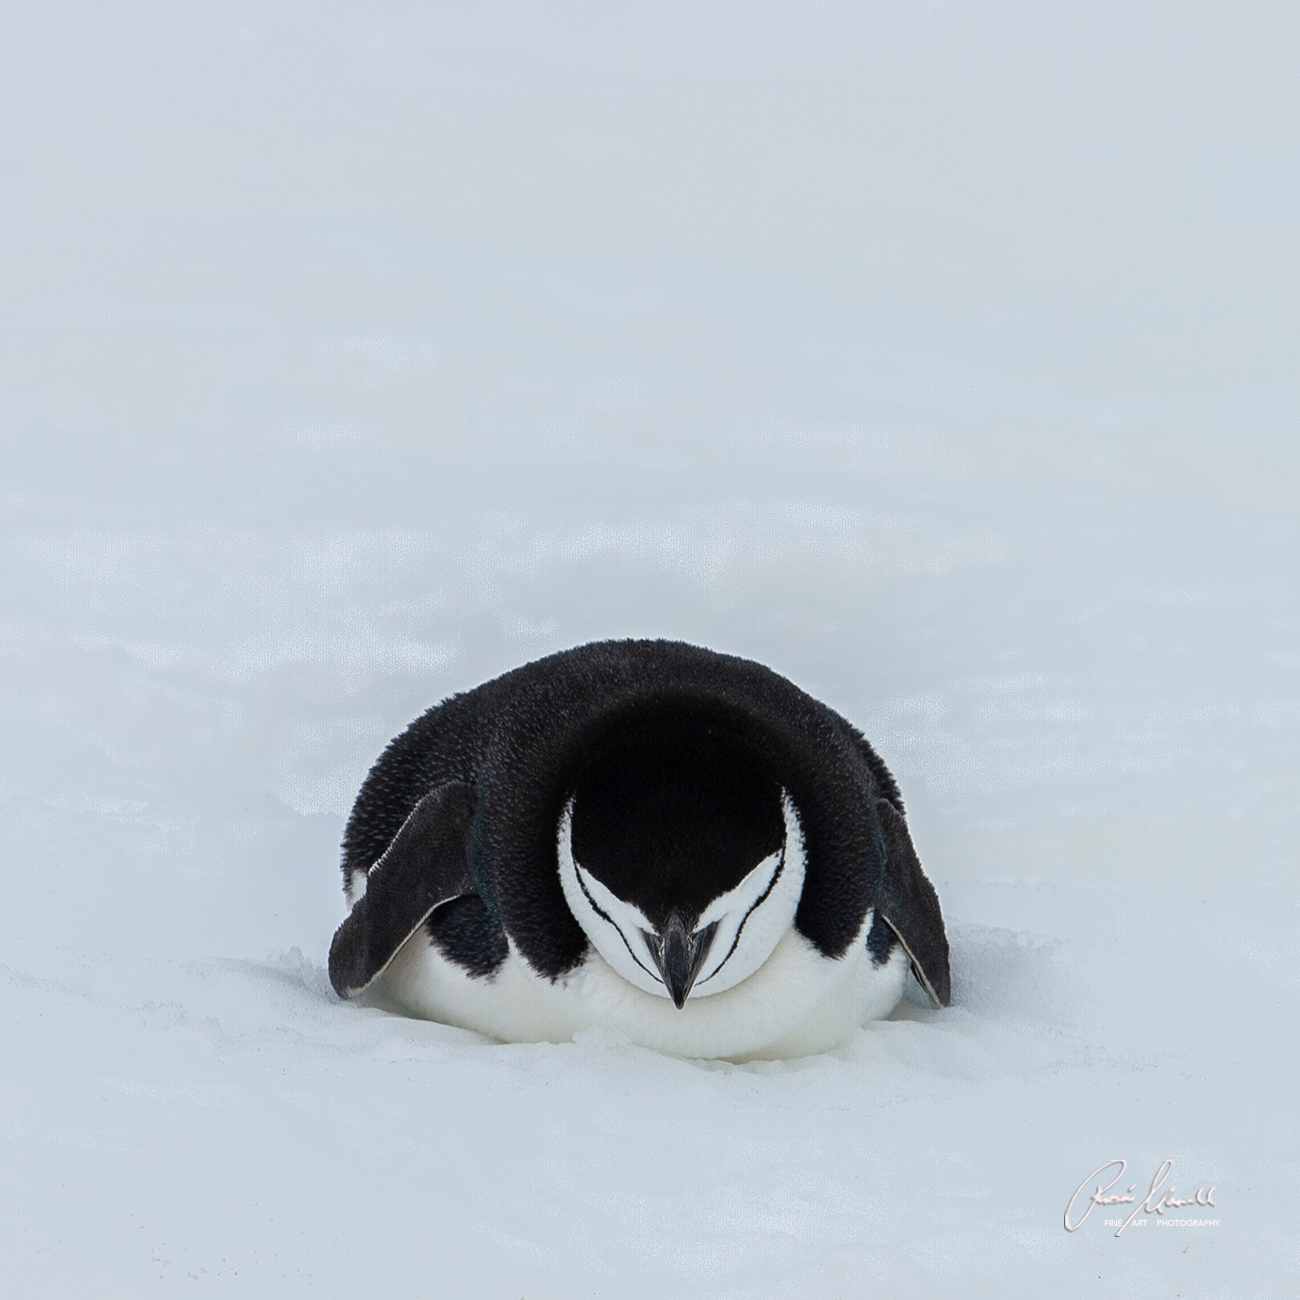 A Chinstrap Penguin is quietly resting in the snow on Half moon Bay Island, Antarctica. Square Format.